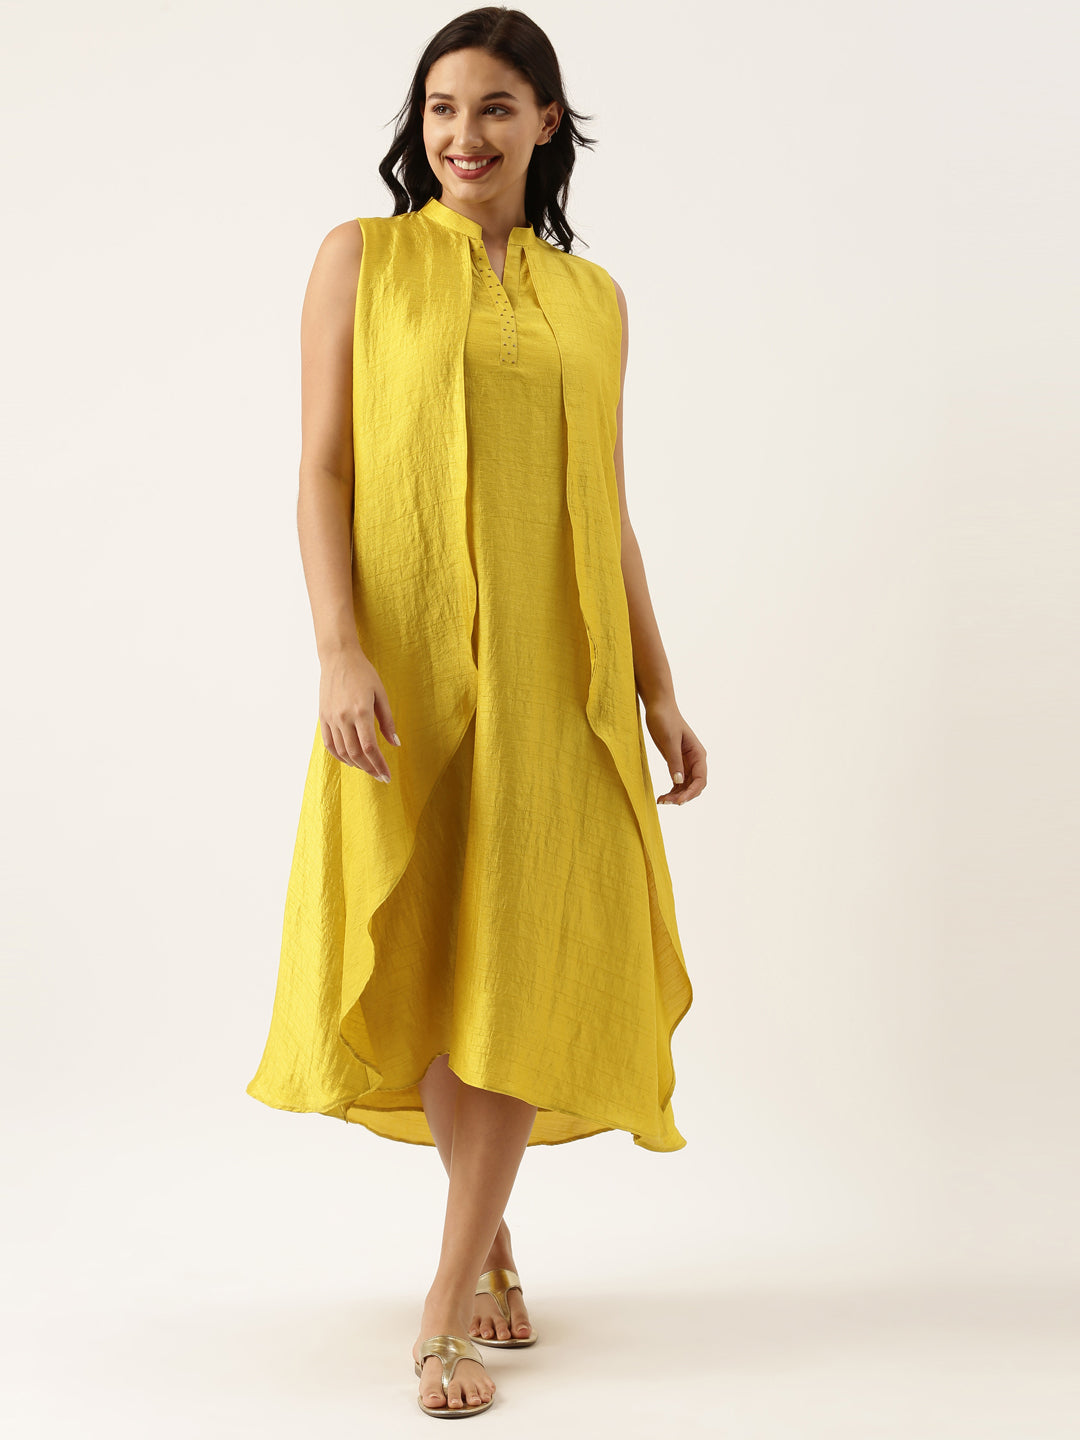 Yellow Double Layer Dress - AS0472